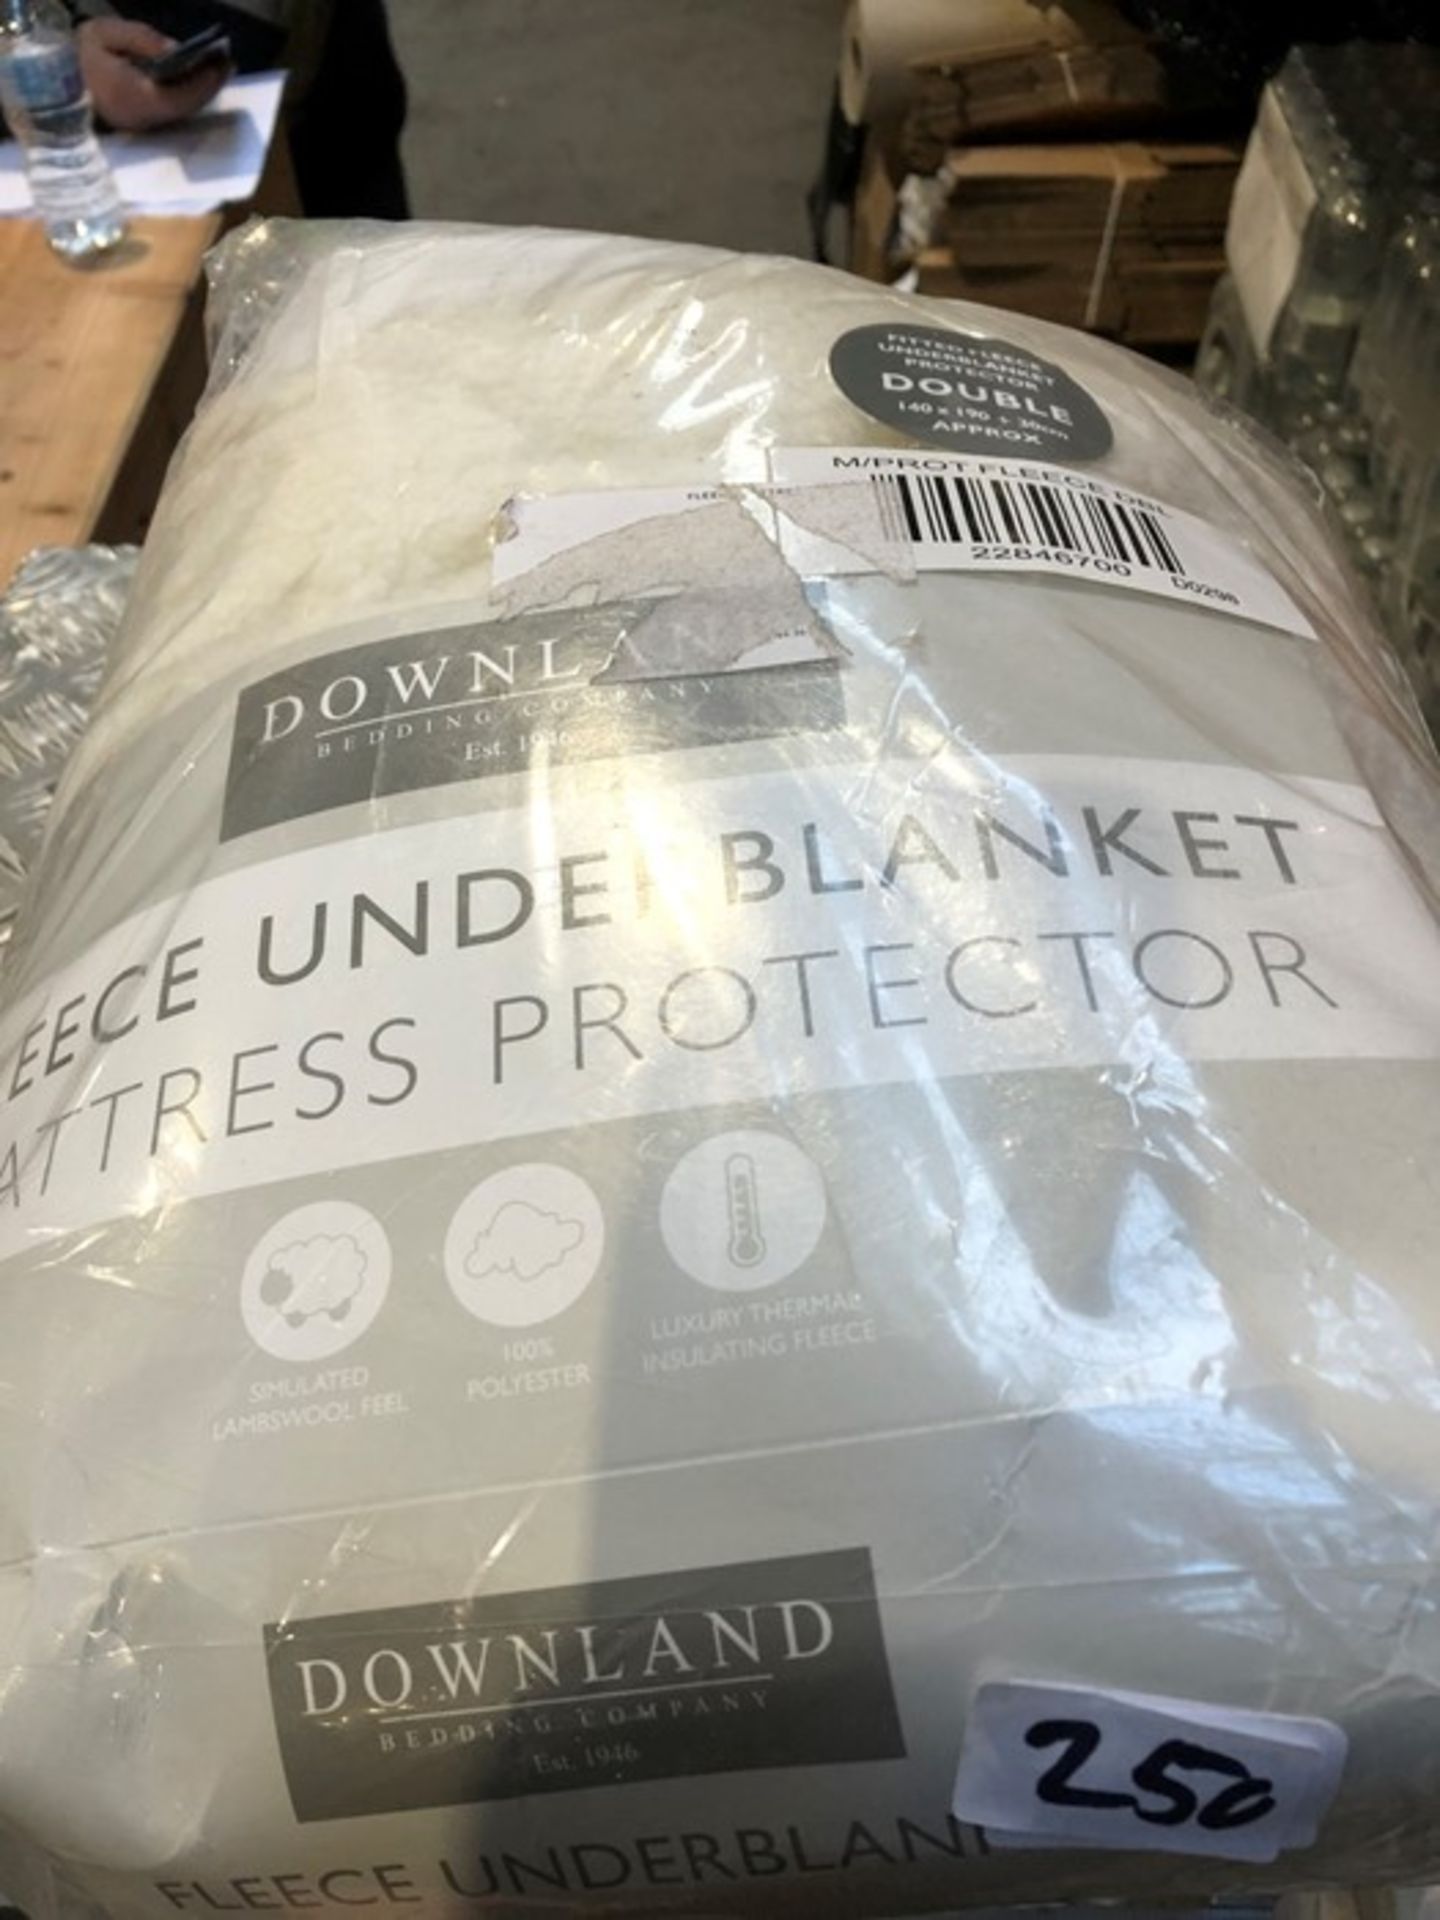 1 BAGGED DOWNLAN FLEECE UNDERBLANKET MATTRESS PROTECTOR / SIZE: DOUBLE (PUBLIC VIEWING AVAILABLE)